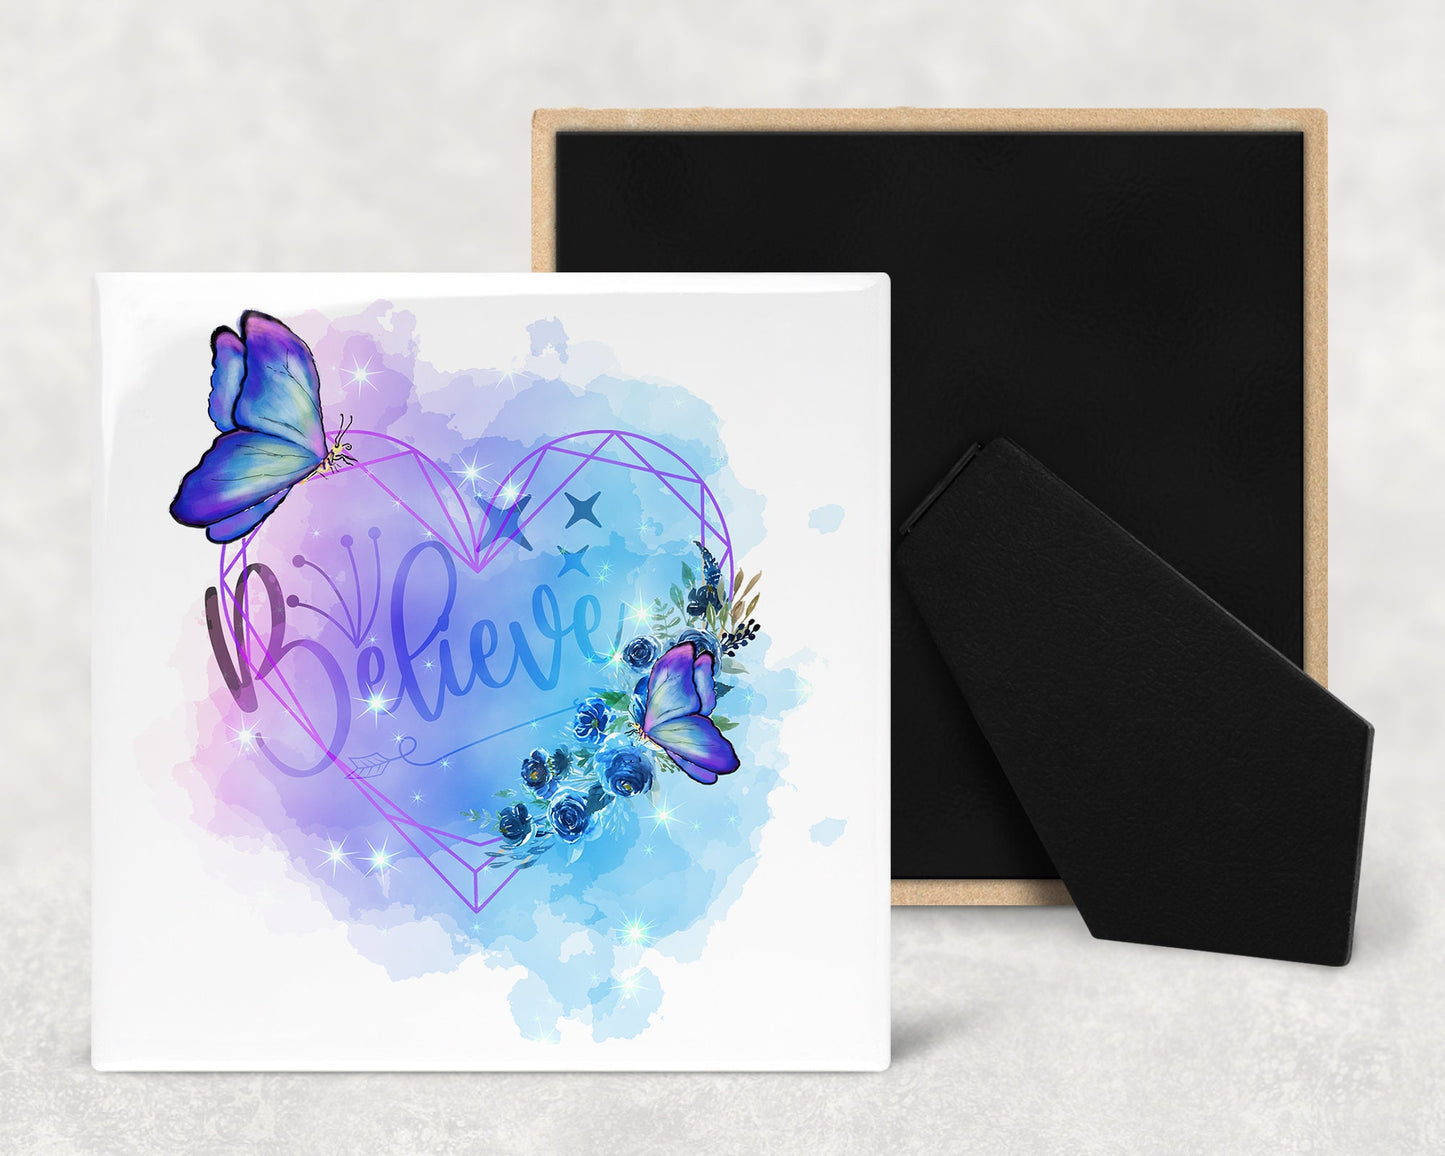 Butterflies Believe Inspirational Art Decorative Ceramic Tile with Optional Easel Back - Available in 3 Sizes